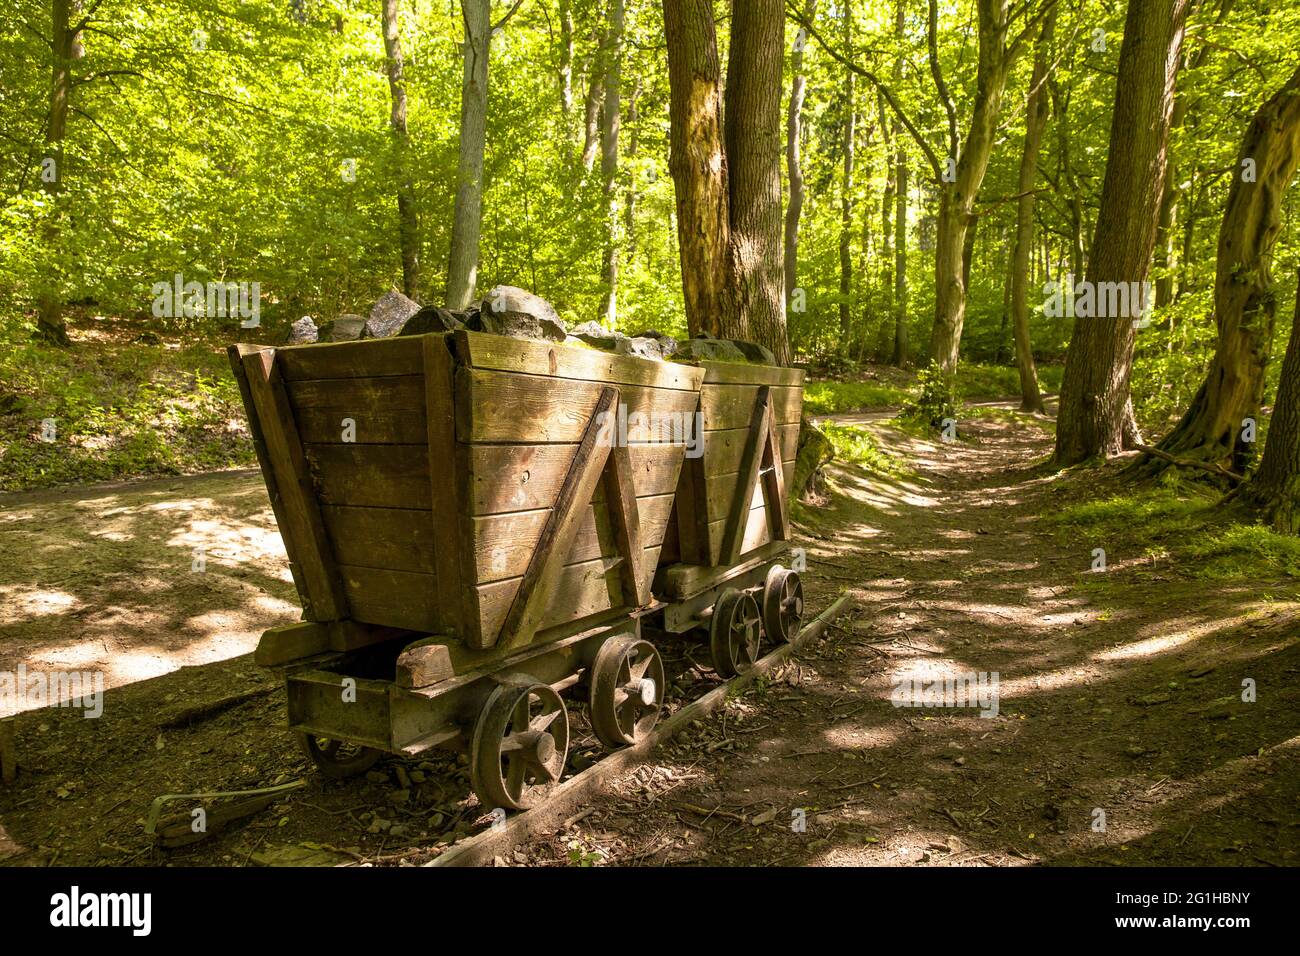 lore of the former horse-drawn railroad on the mining trail in the Muttental valley near Witten-Bommern, Witten, North Rhine-Westphalia, Germany.  Lor Stock Photo